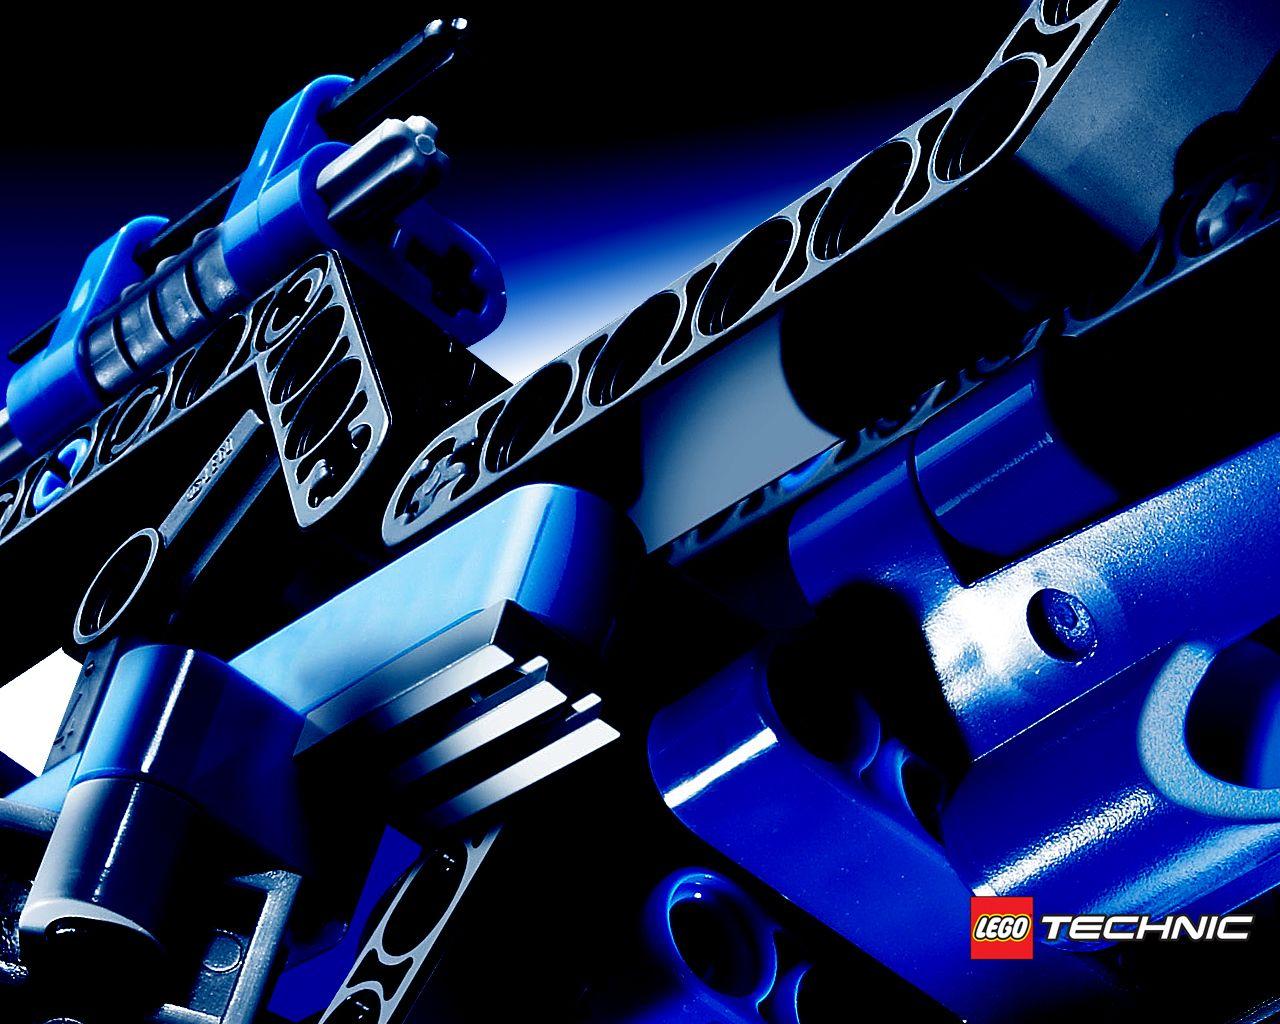 Lego Technic. Free Desktop Wallpaper for Widescreen, HD and Mobile